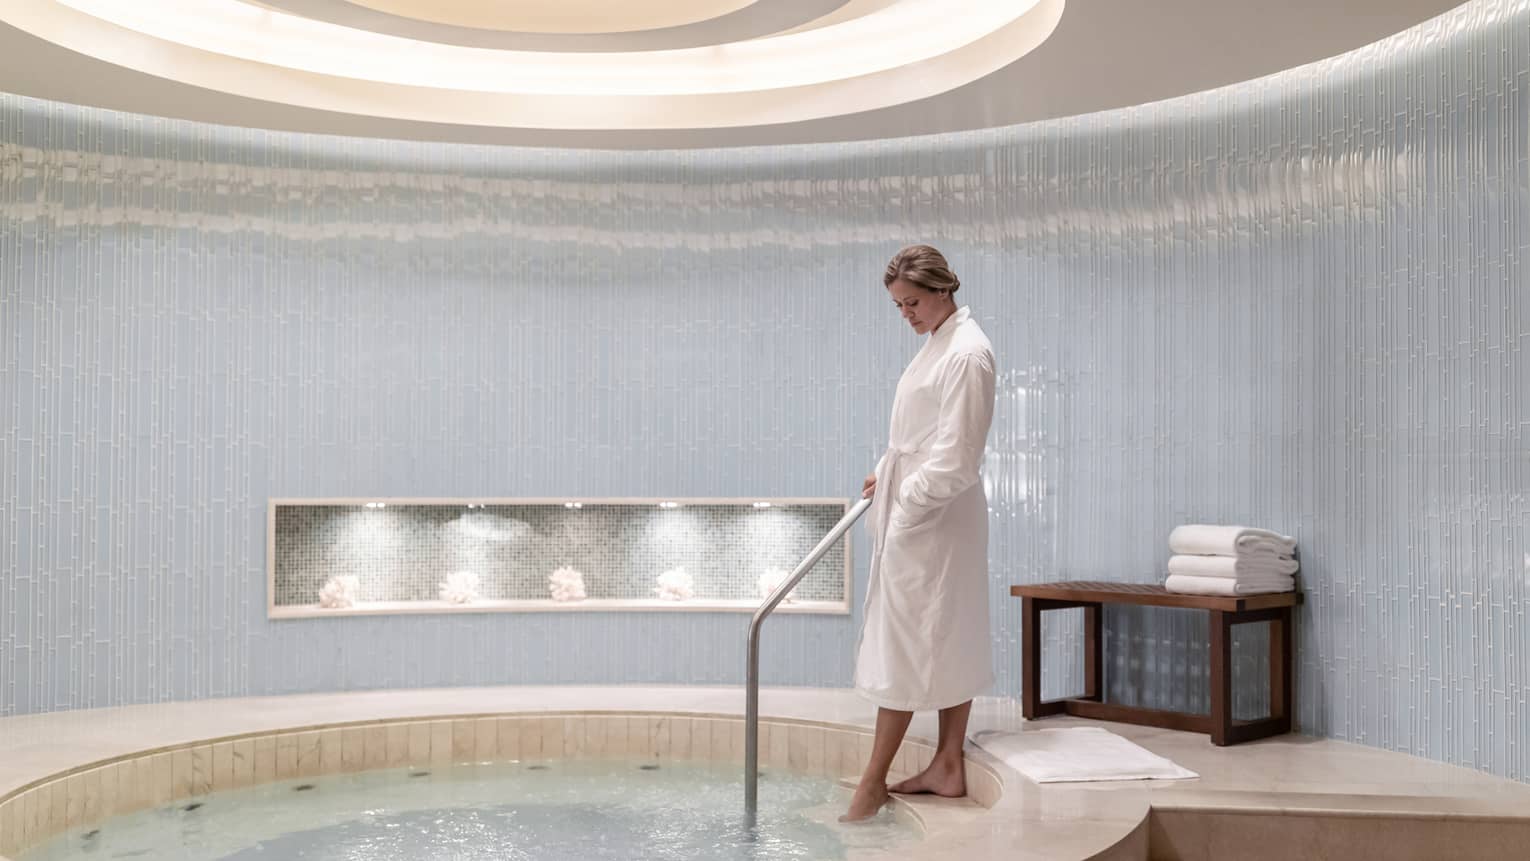 Woman wearing white robe steps into round spa hot tub